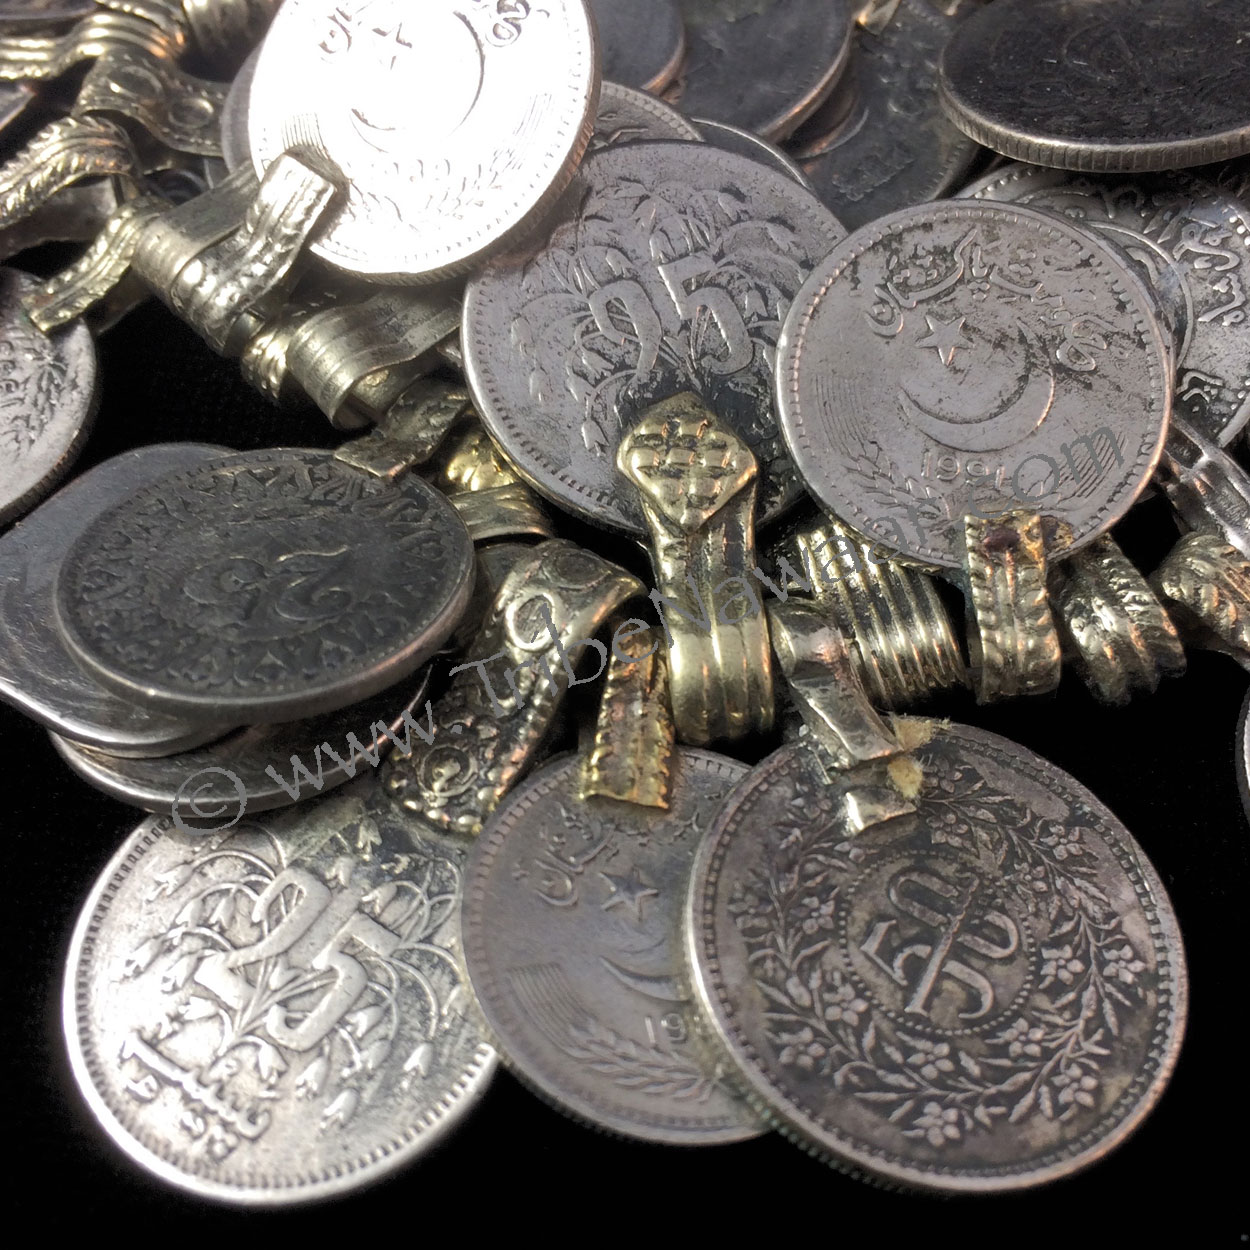 Wholesale Coin Charms for Jewelry Making - TierraCast